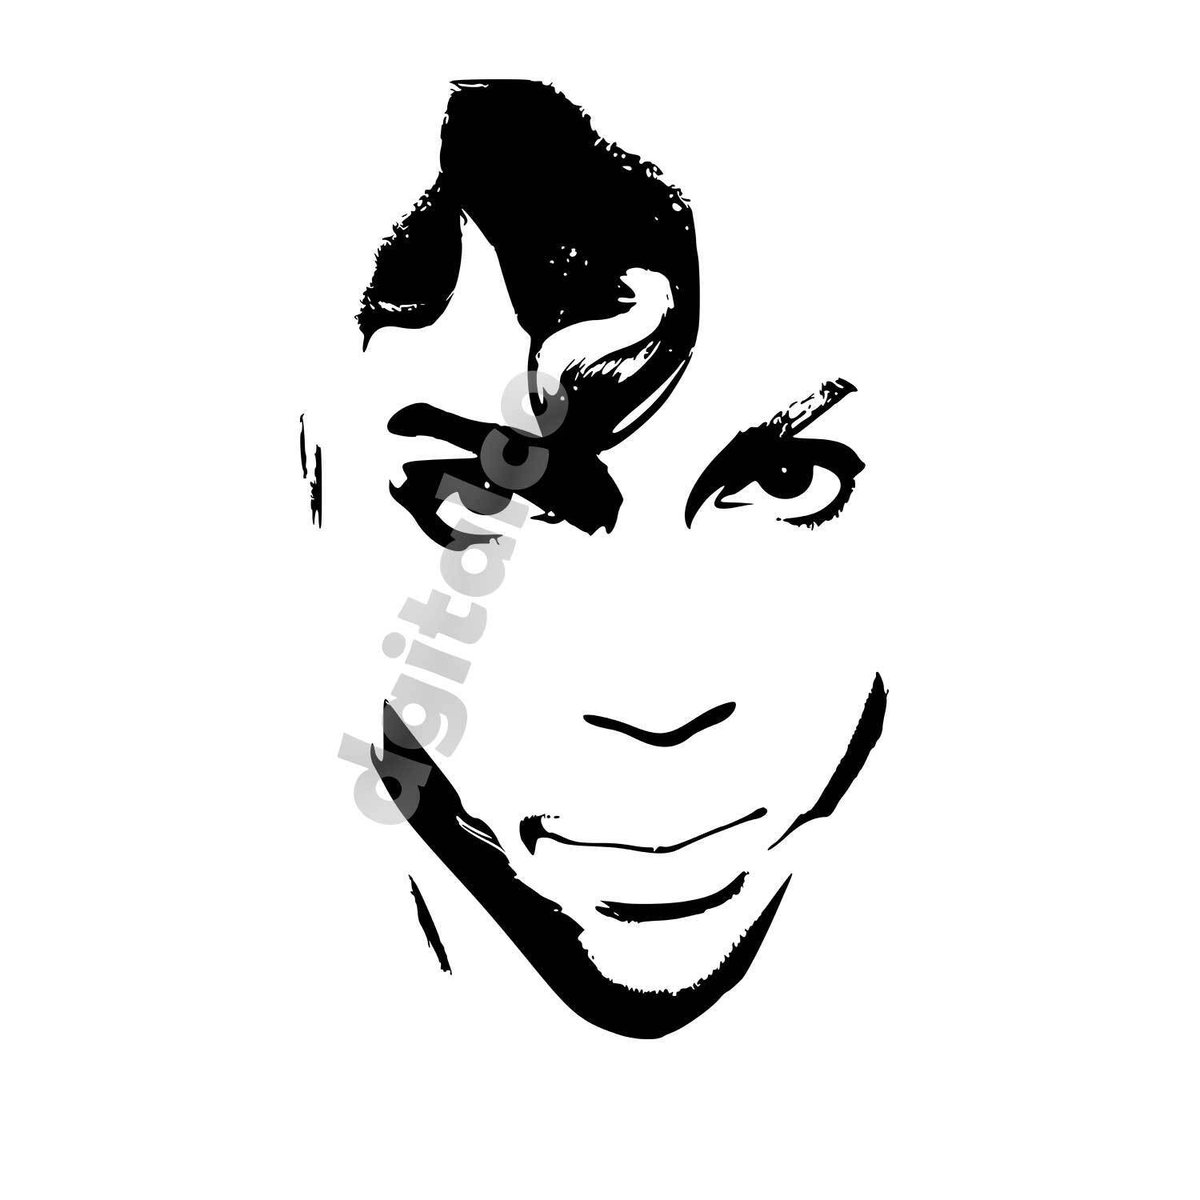 🎤✨ Don't miss out on this vector portrait of the iconic singer Prince! 🔗 Link in bio to see more! #Prince #VectorPortrait #IconicMusic 🎸🎵